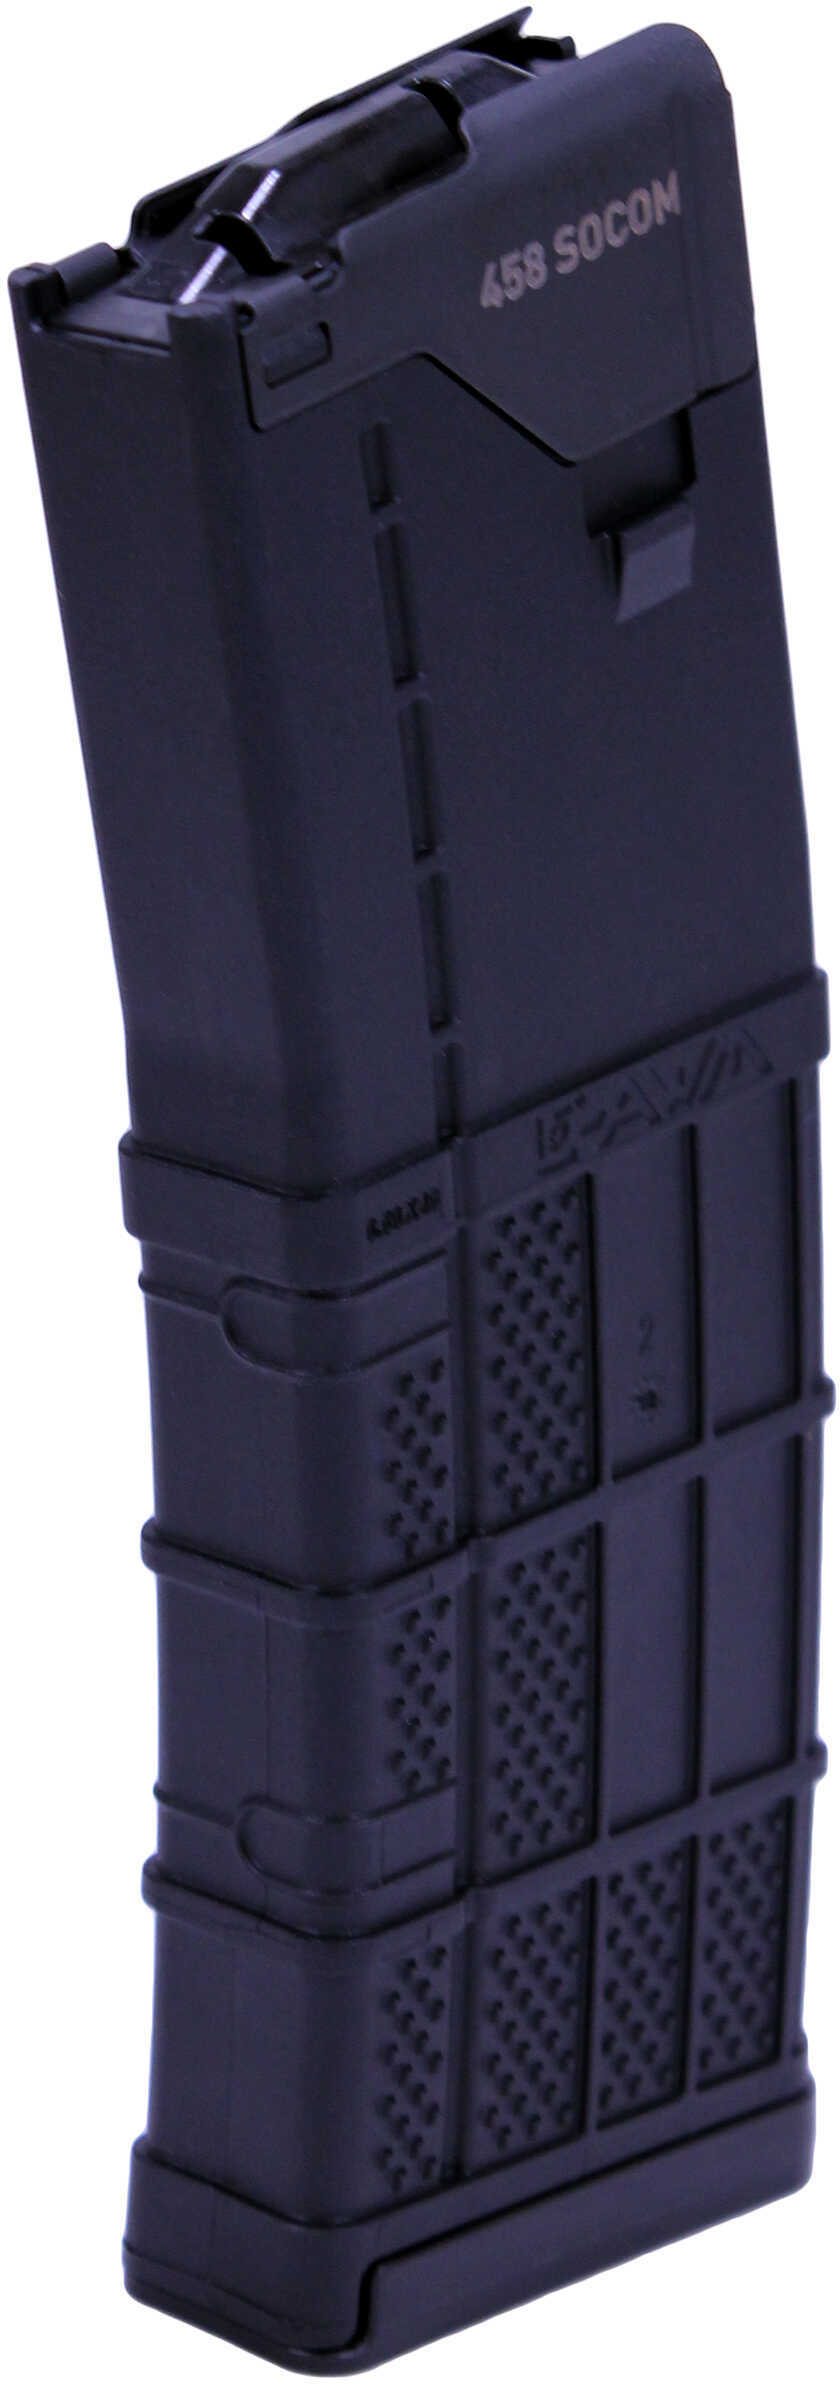 CMMG Magazine MKW-15 .458 SOCOM 30 Rounds Modified To 10 Hi-cap Md: 48AFC44